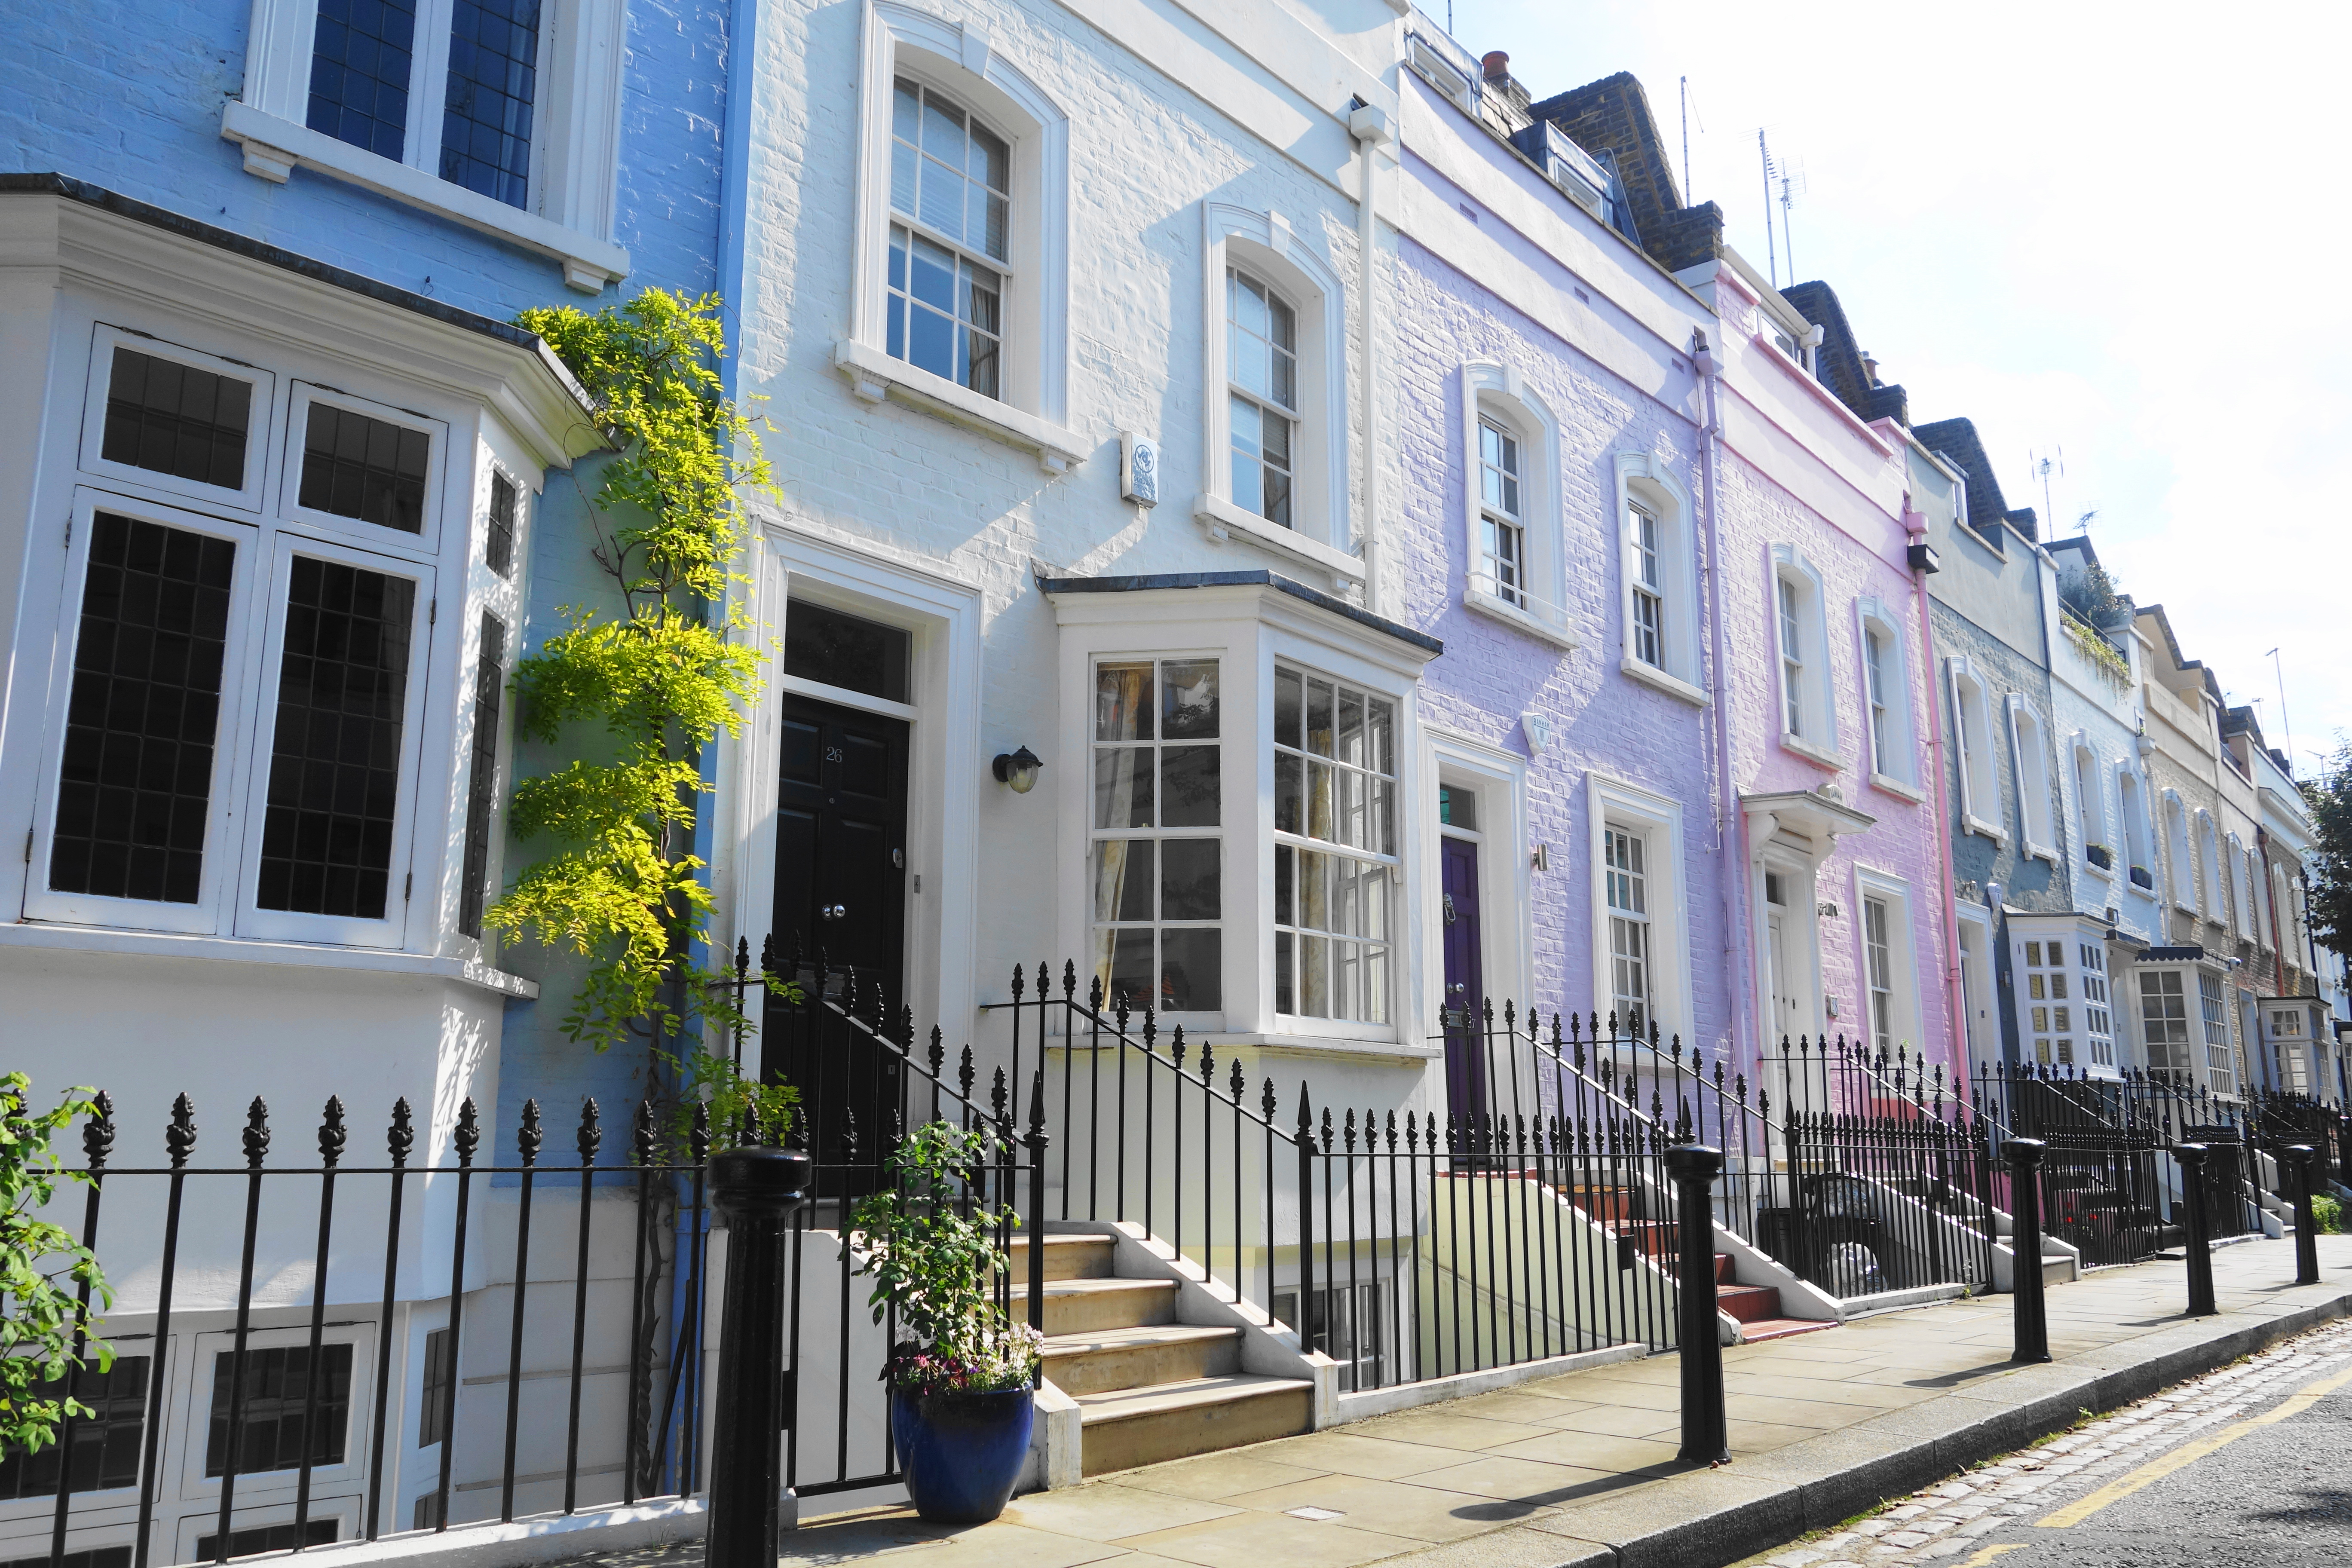 London Buy to Let Mortgages in 2015